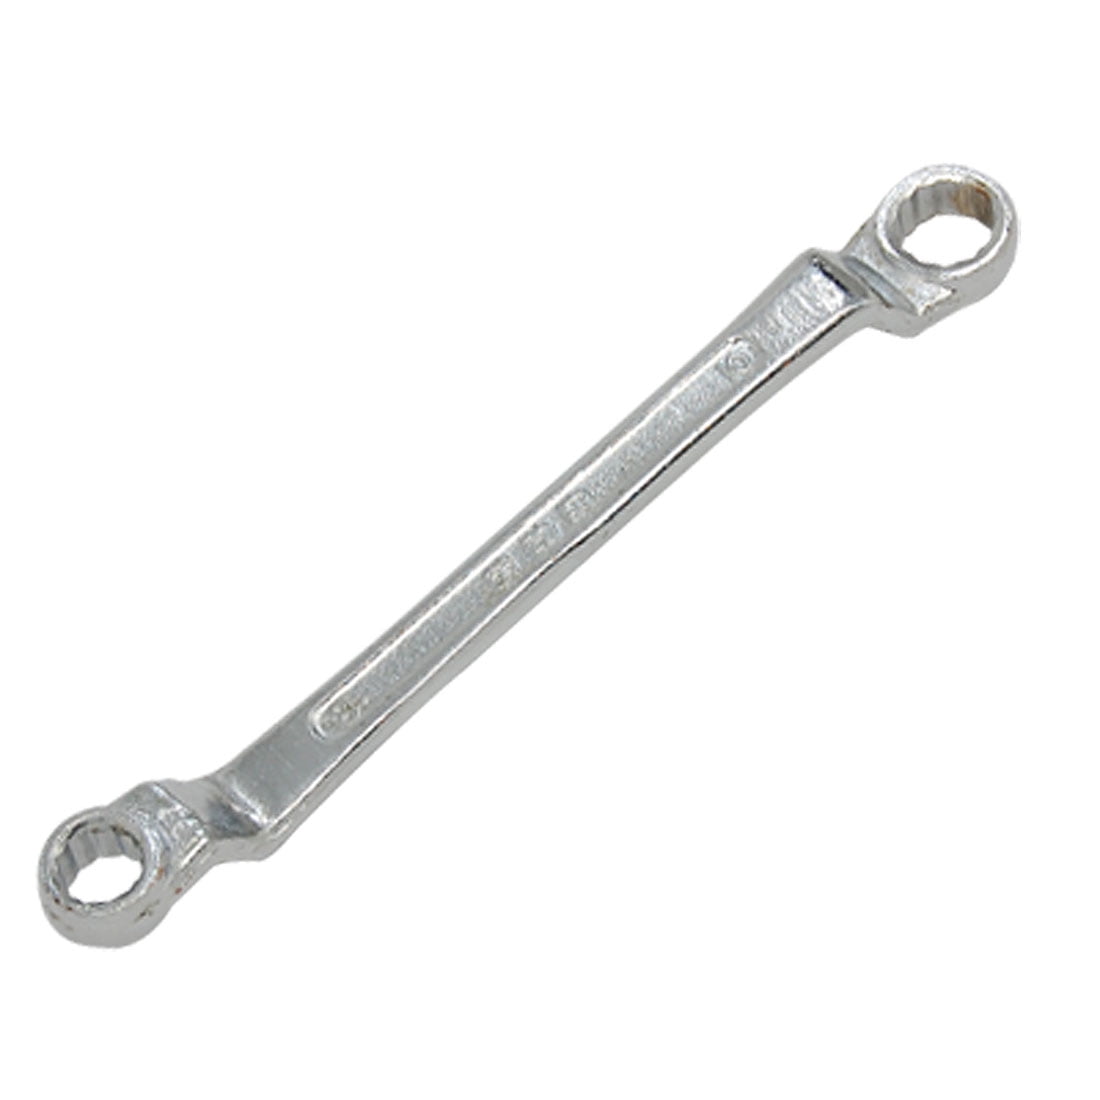 Metric 8mm 10mm Dual-side Open End Wrench Tool New 